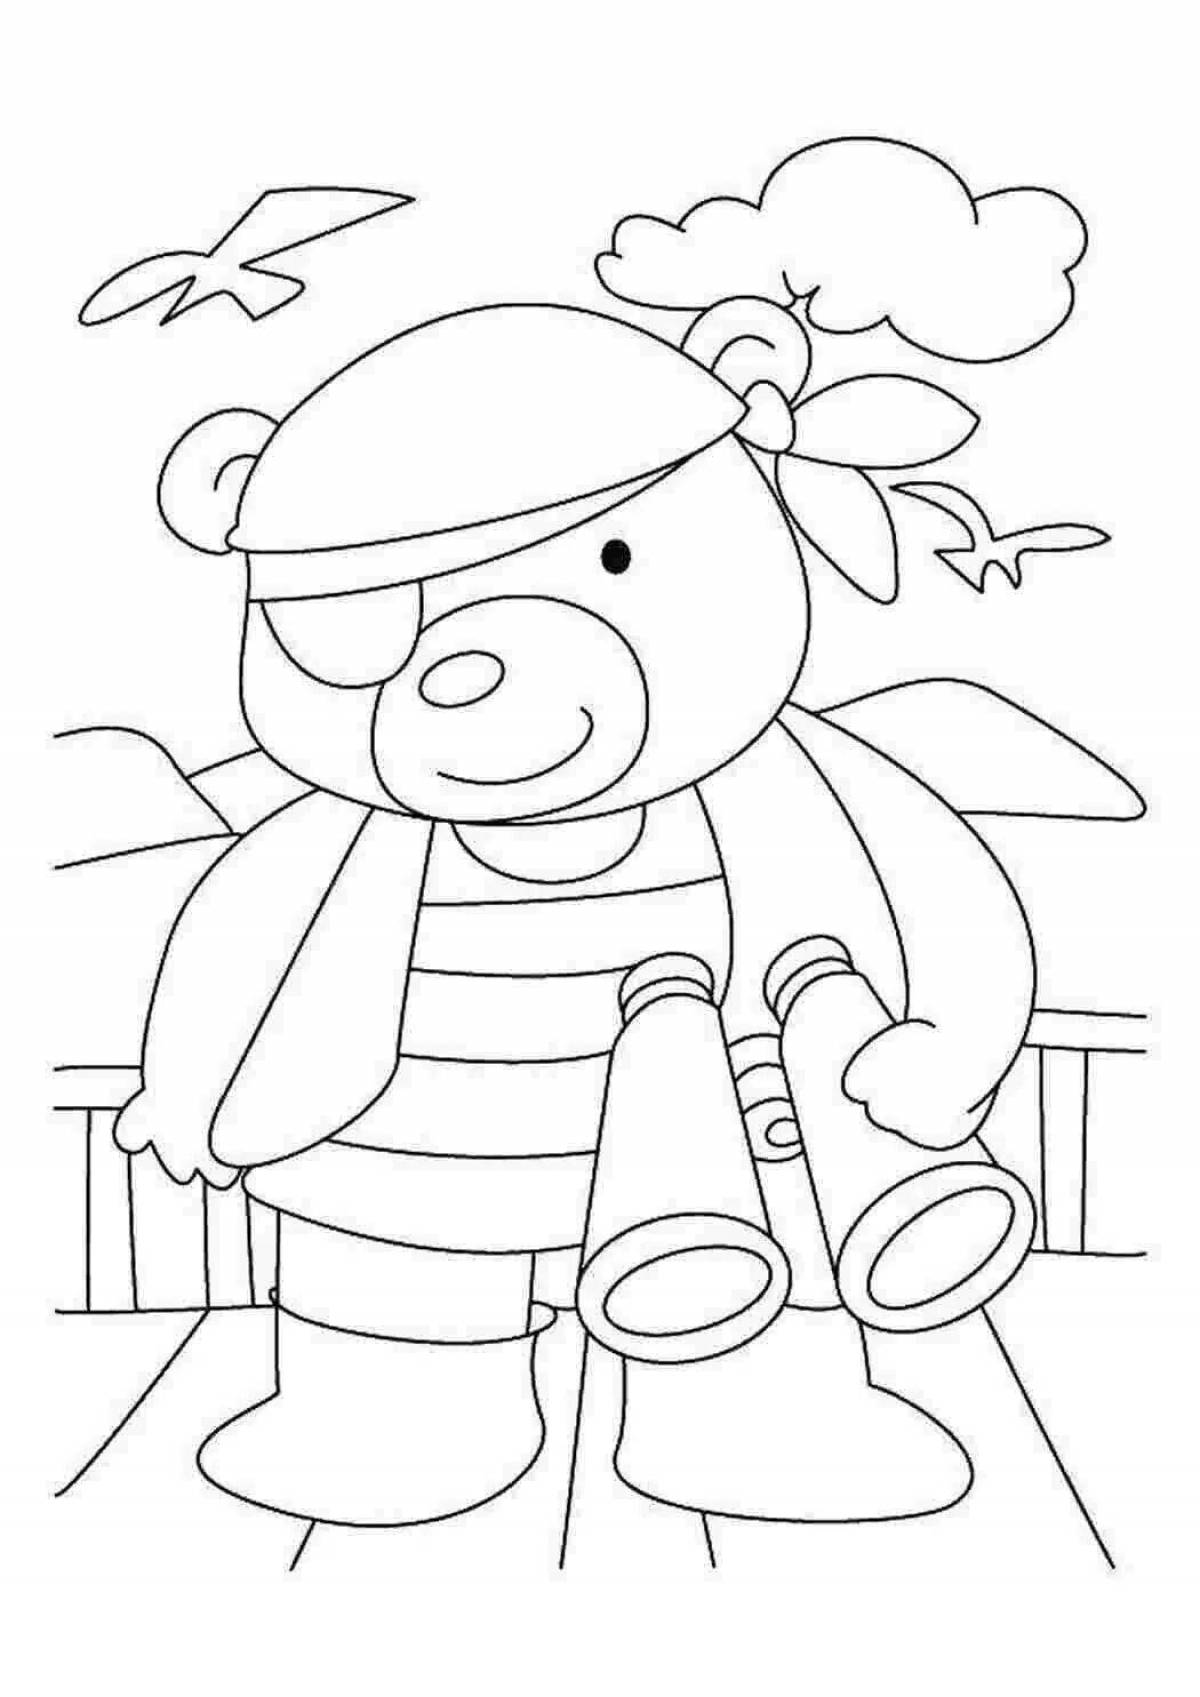 Coloring page cheerful cognitor